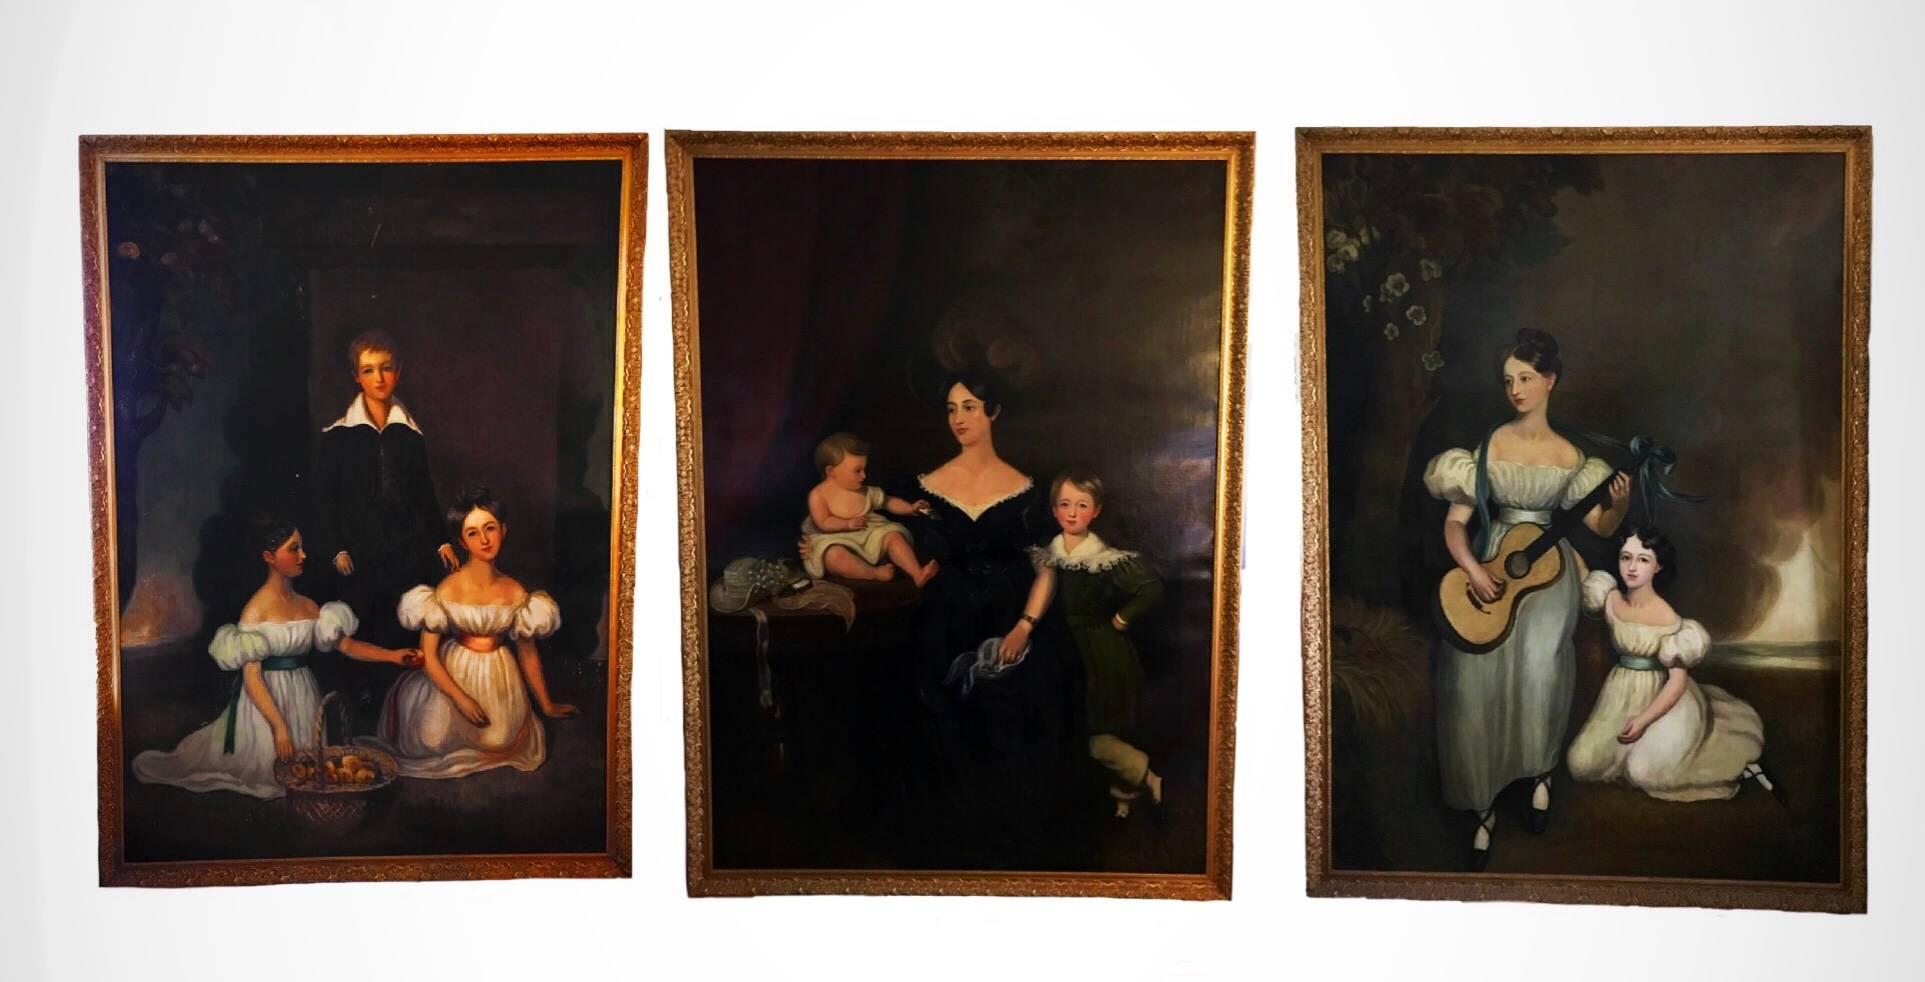 Unknown Portrait Painting - Three full length portraits of the Chandos-Pole Family from Radbourne Hall U.K